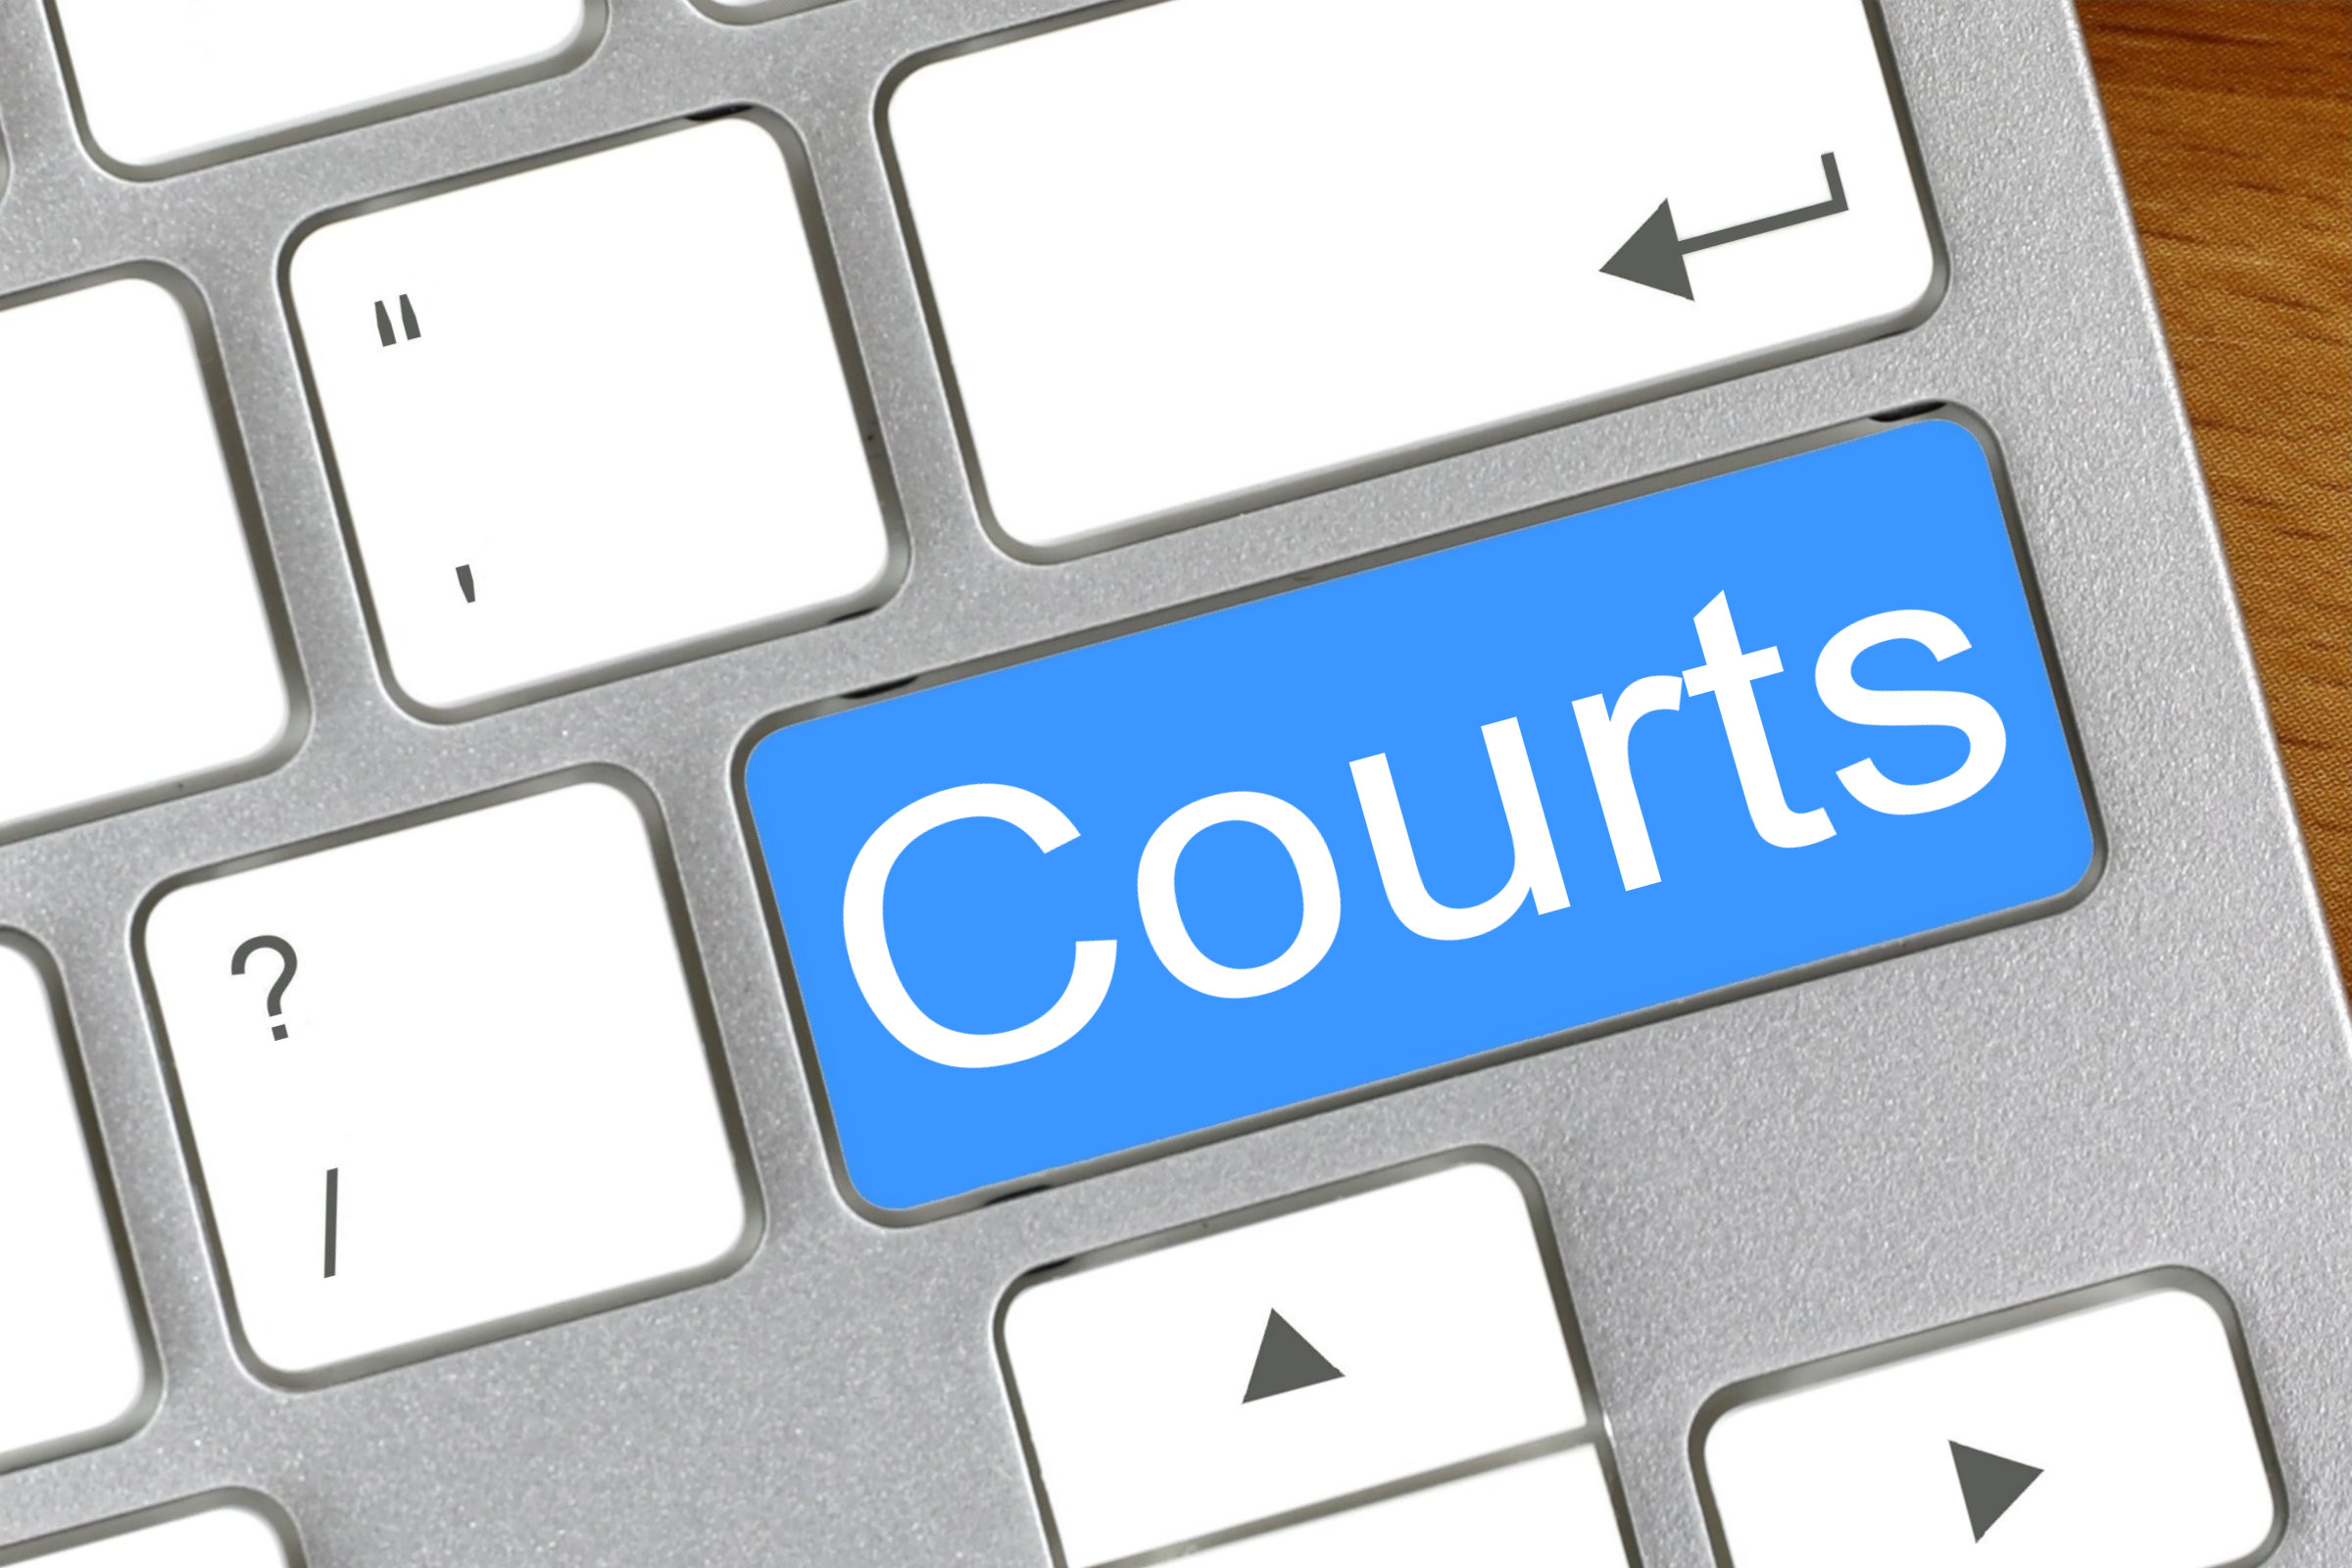 courts